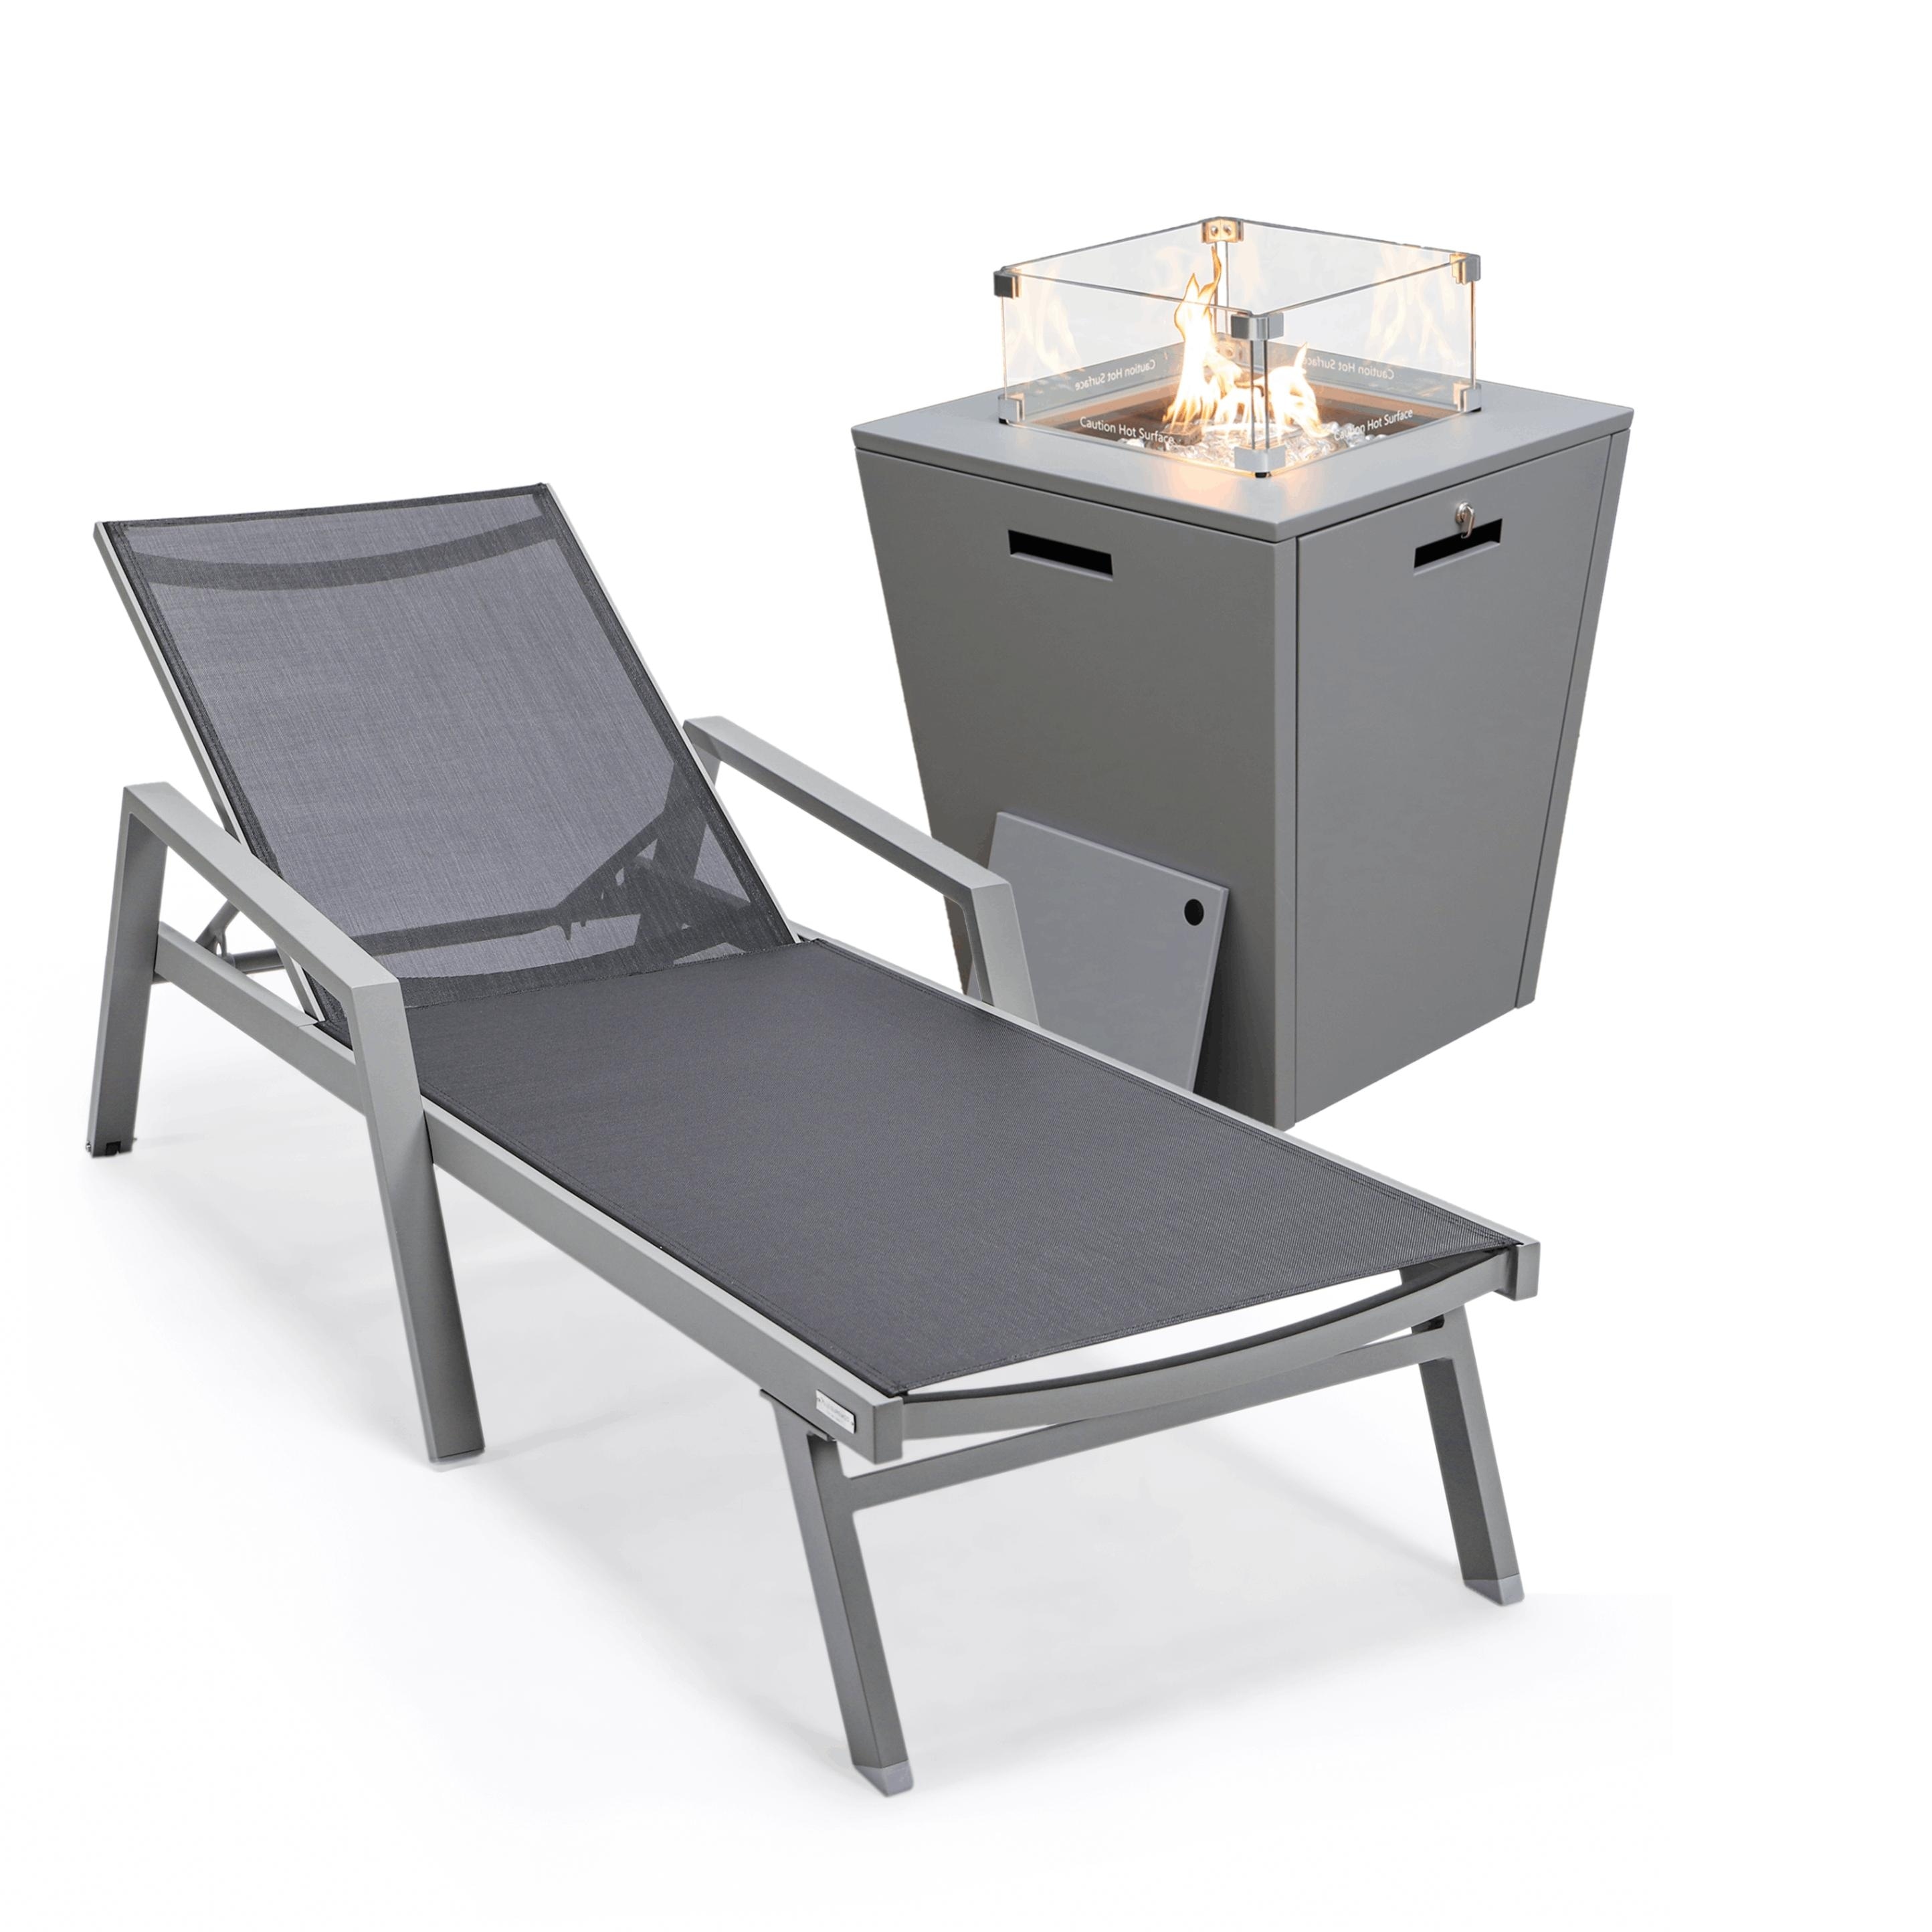 Leisuremod Marlin Chaise Lounge Chair With Arms And Fire Pit Table